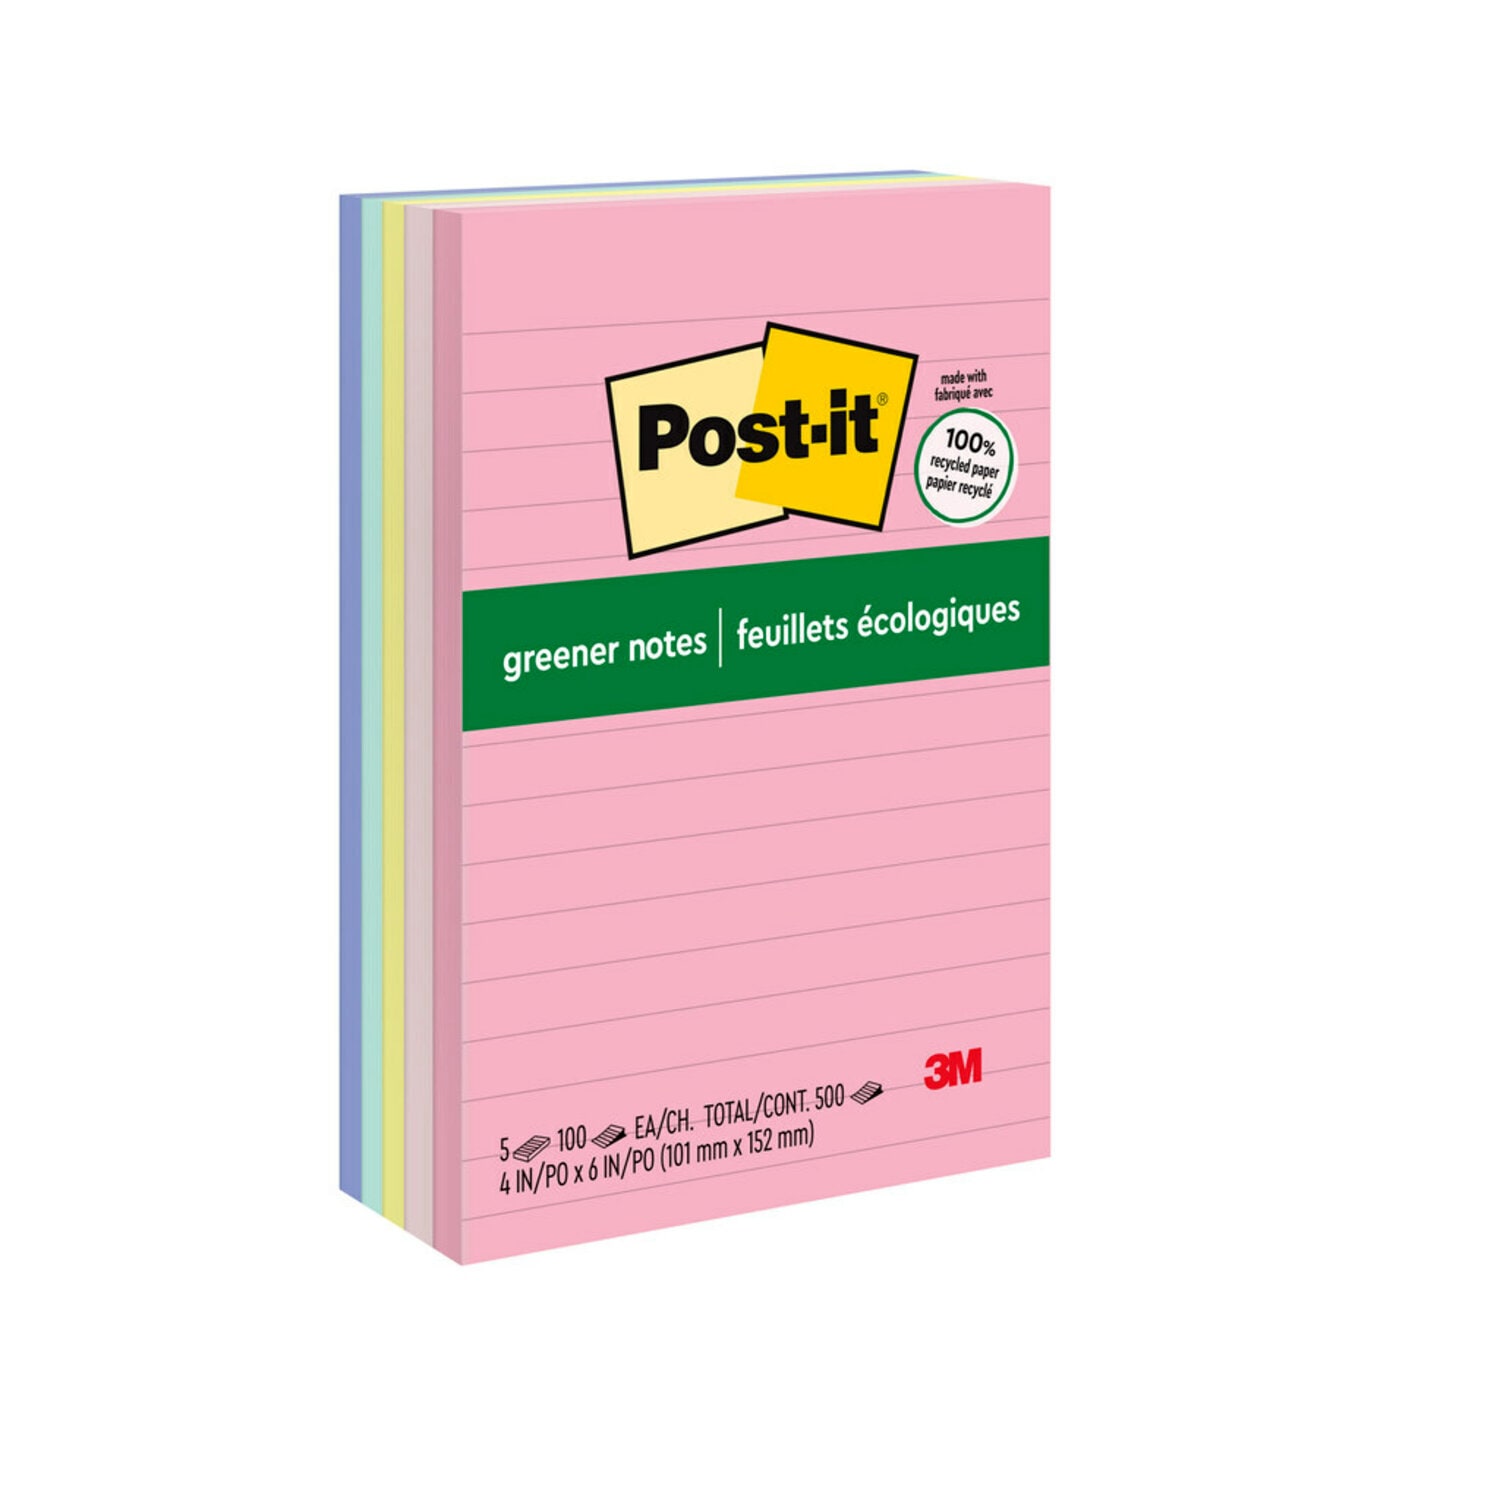 7100243775 - Post-it Greener Notes 660-RP-A, 4 in x 6 in (101 mm x 152 mm), Sweet Sprinkles Collection